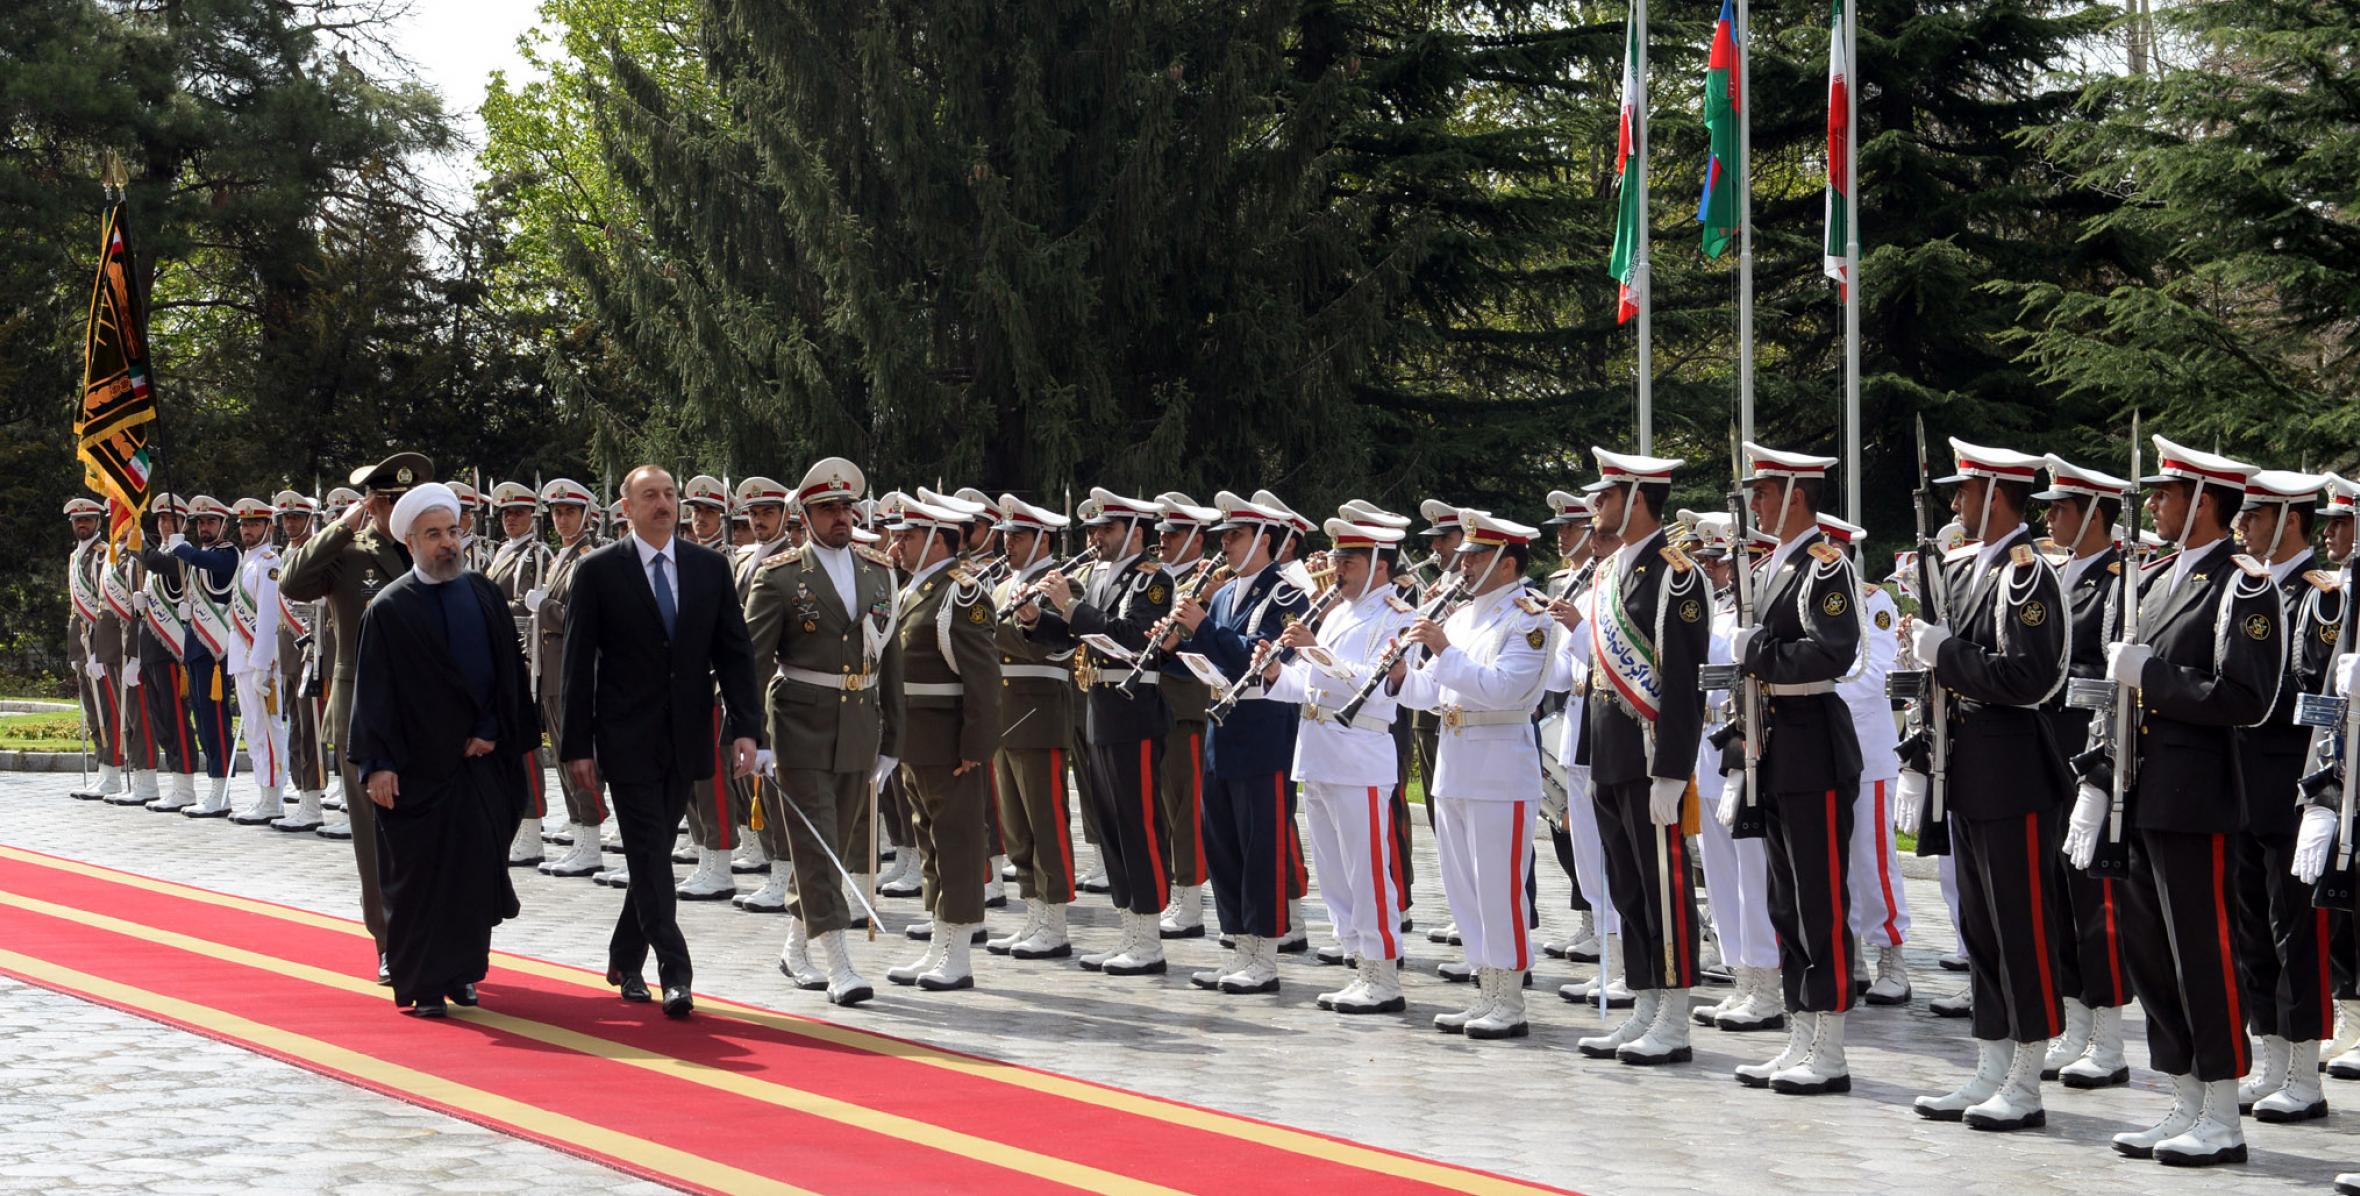 Official welcoming ceremony for President Ilham Aliyev was held at the President's Palace in Tehran